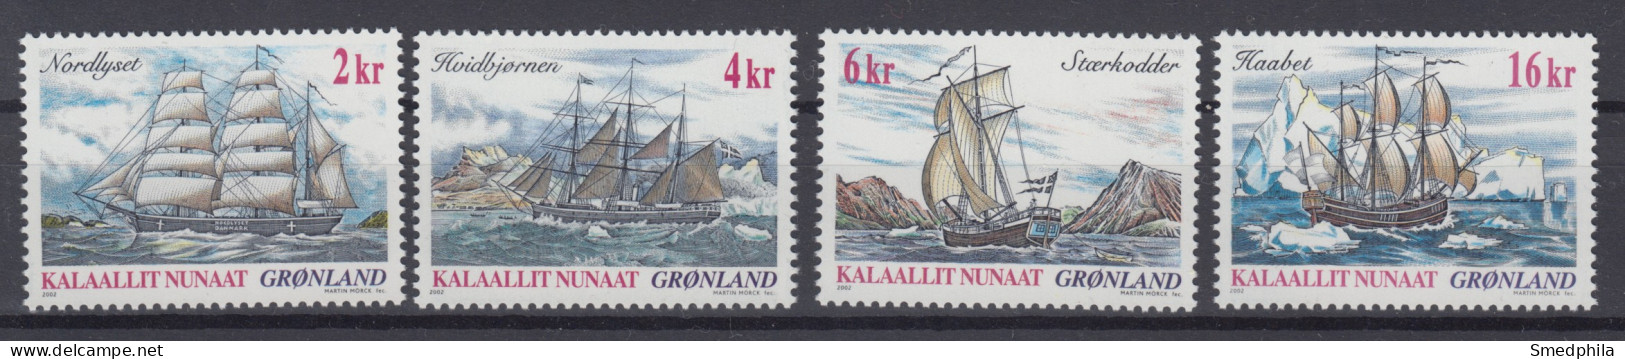 Greenland 2002 - Michel 381-384 MNH ** - Unused Stamps